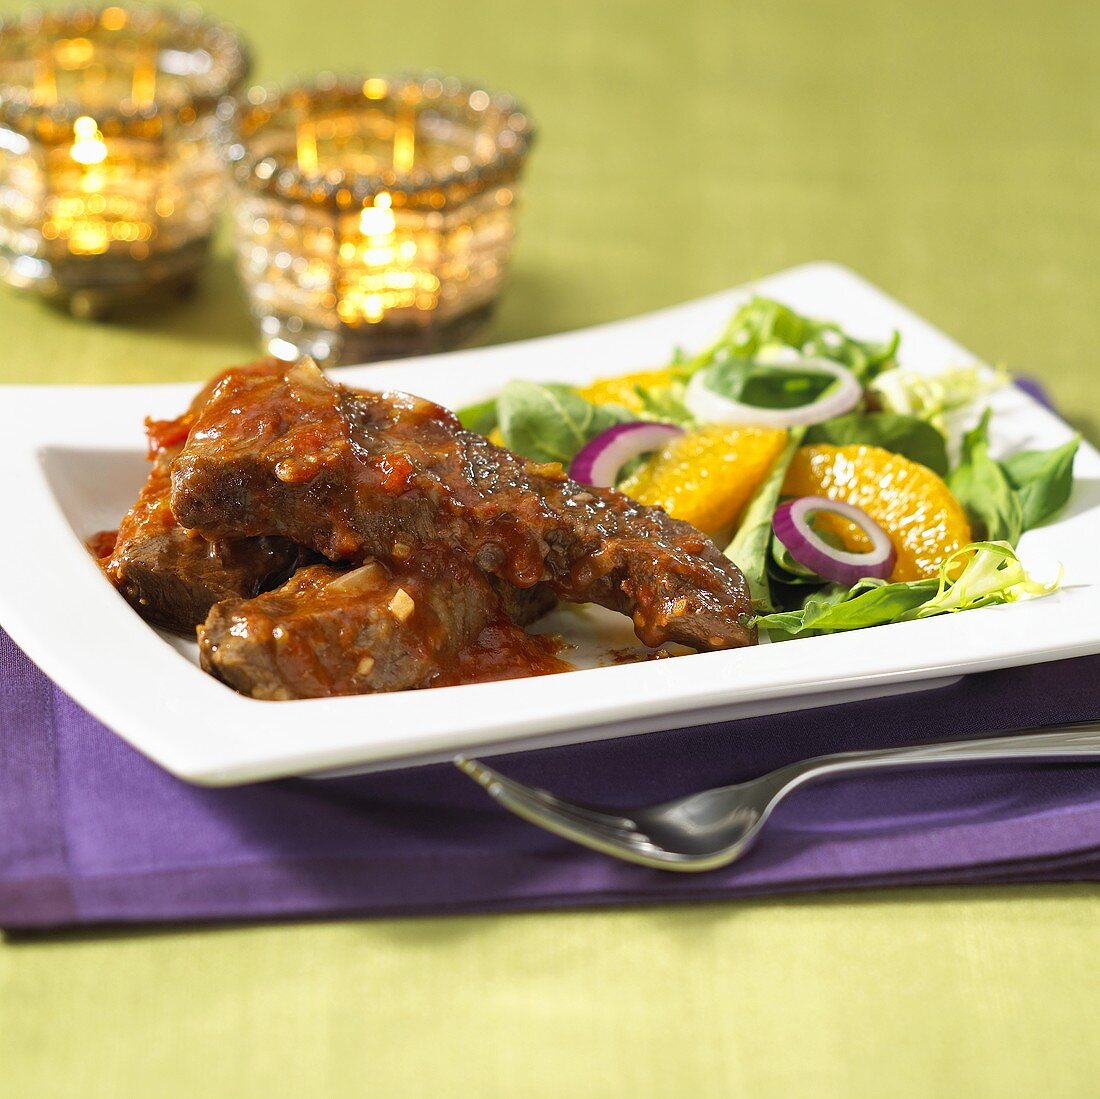 Ribs with spicy sauce and salad